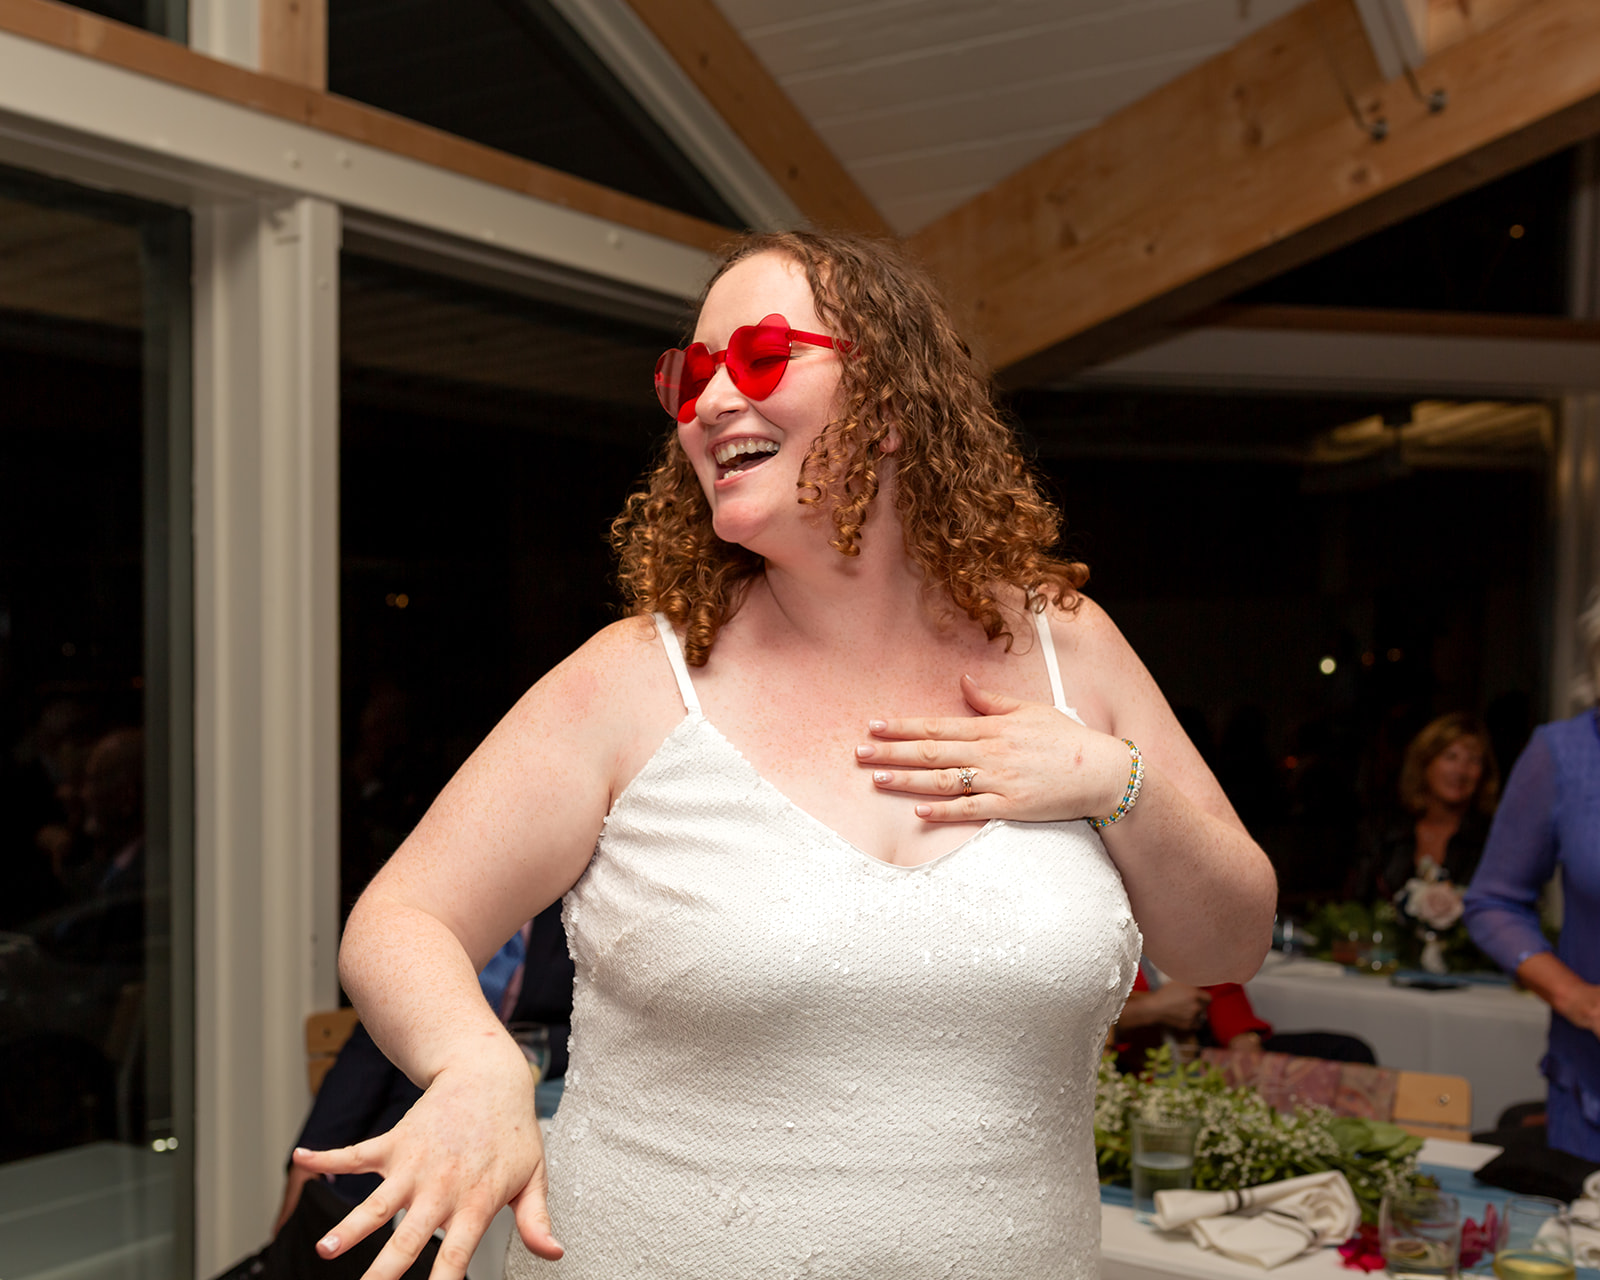 swiftie bride in sequin dress and heart shaped sunglasses